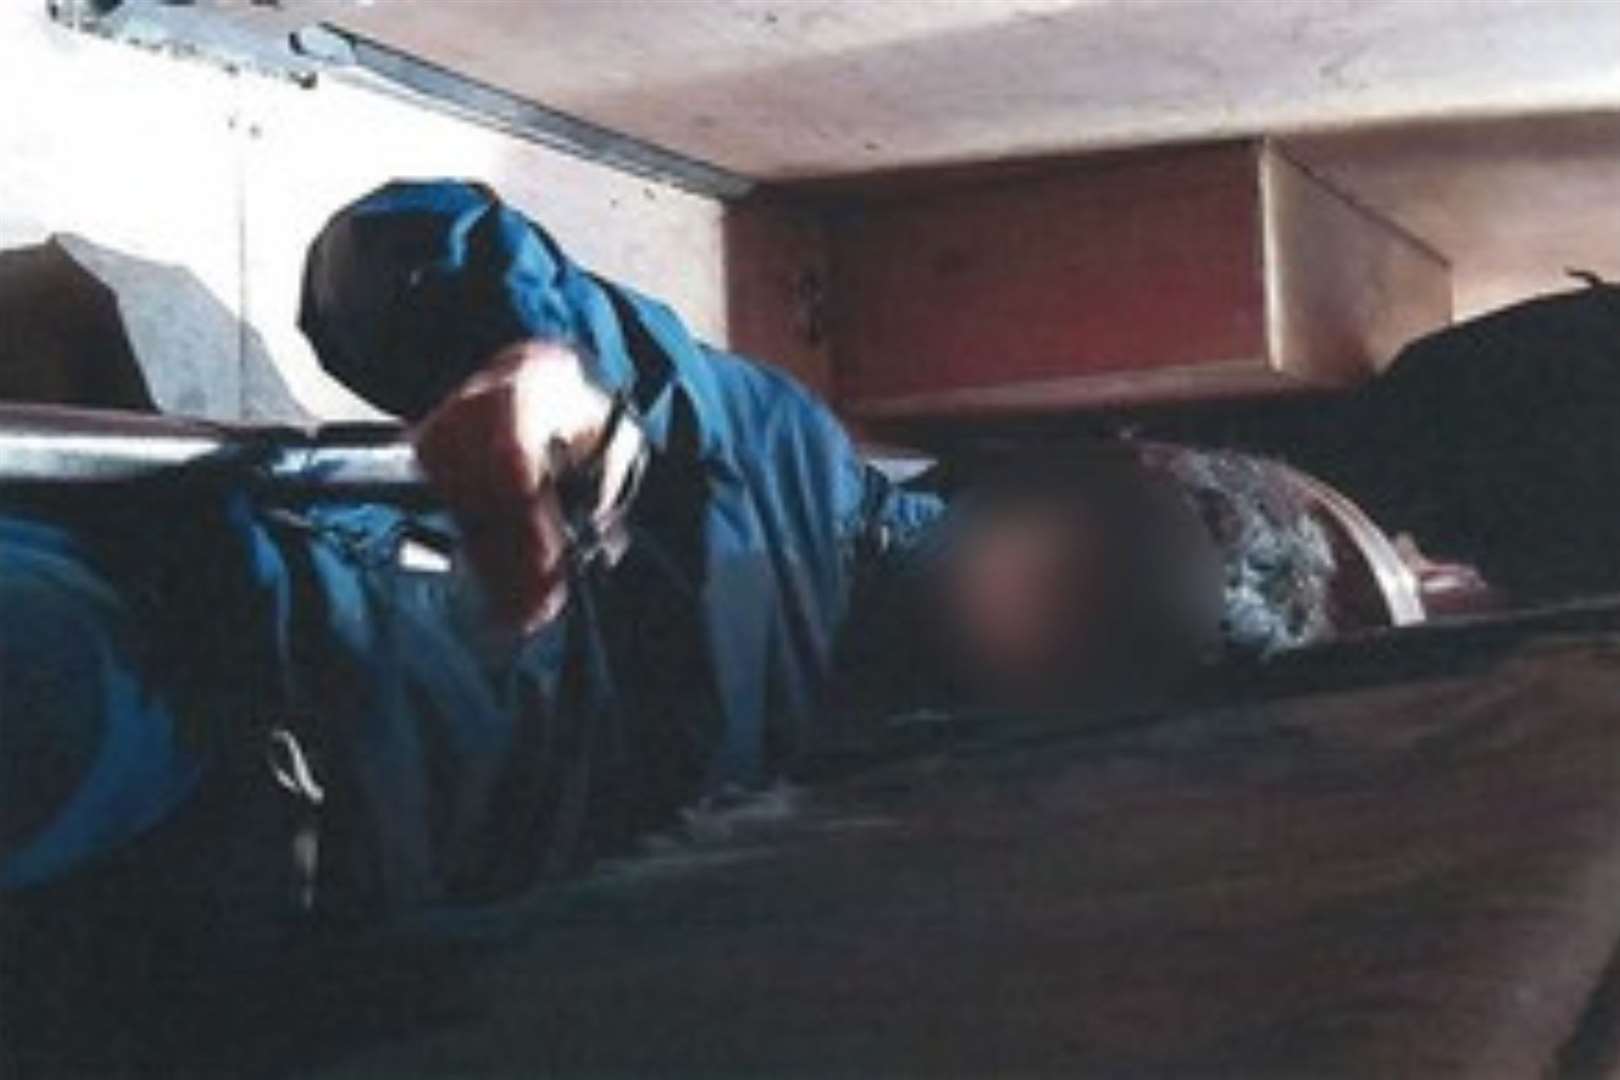 Two Iraqi men were found in sofas in the back of a van on the way to Folkestone. Picture: Home Office